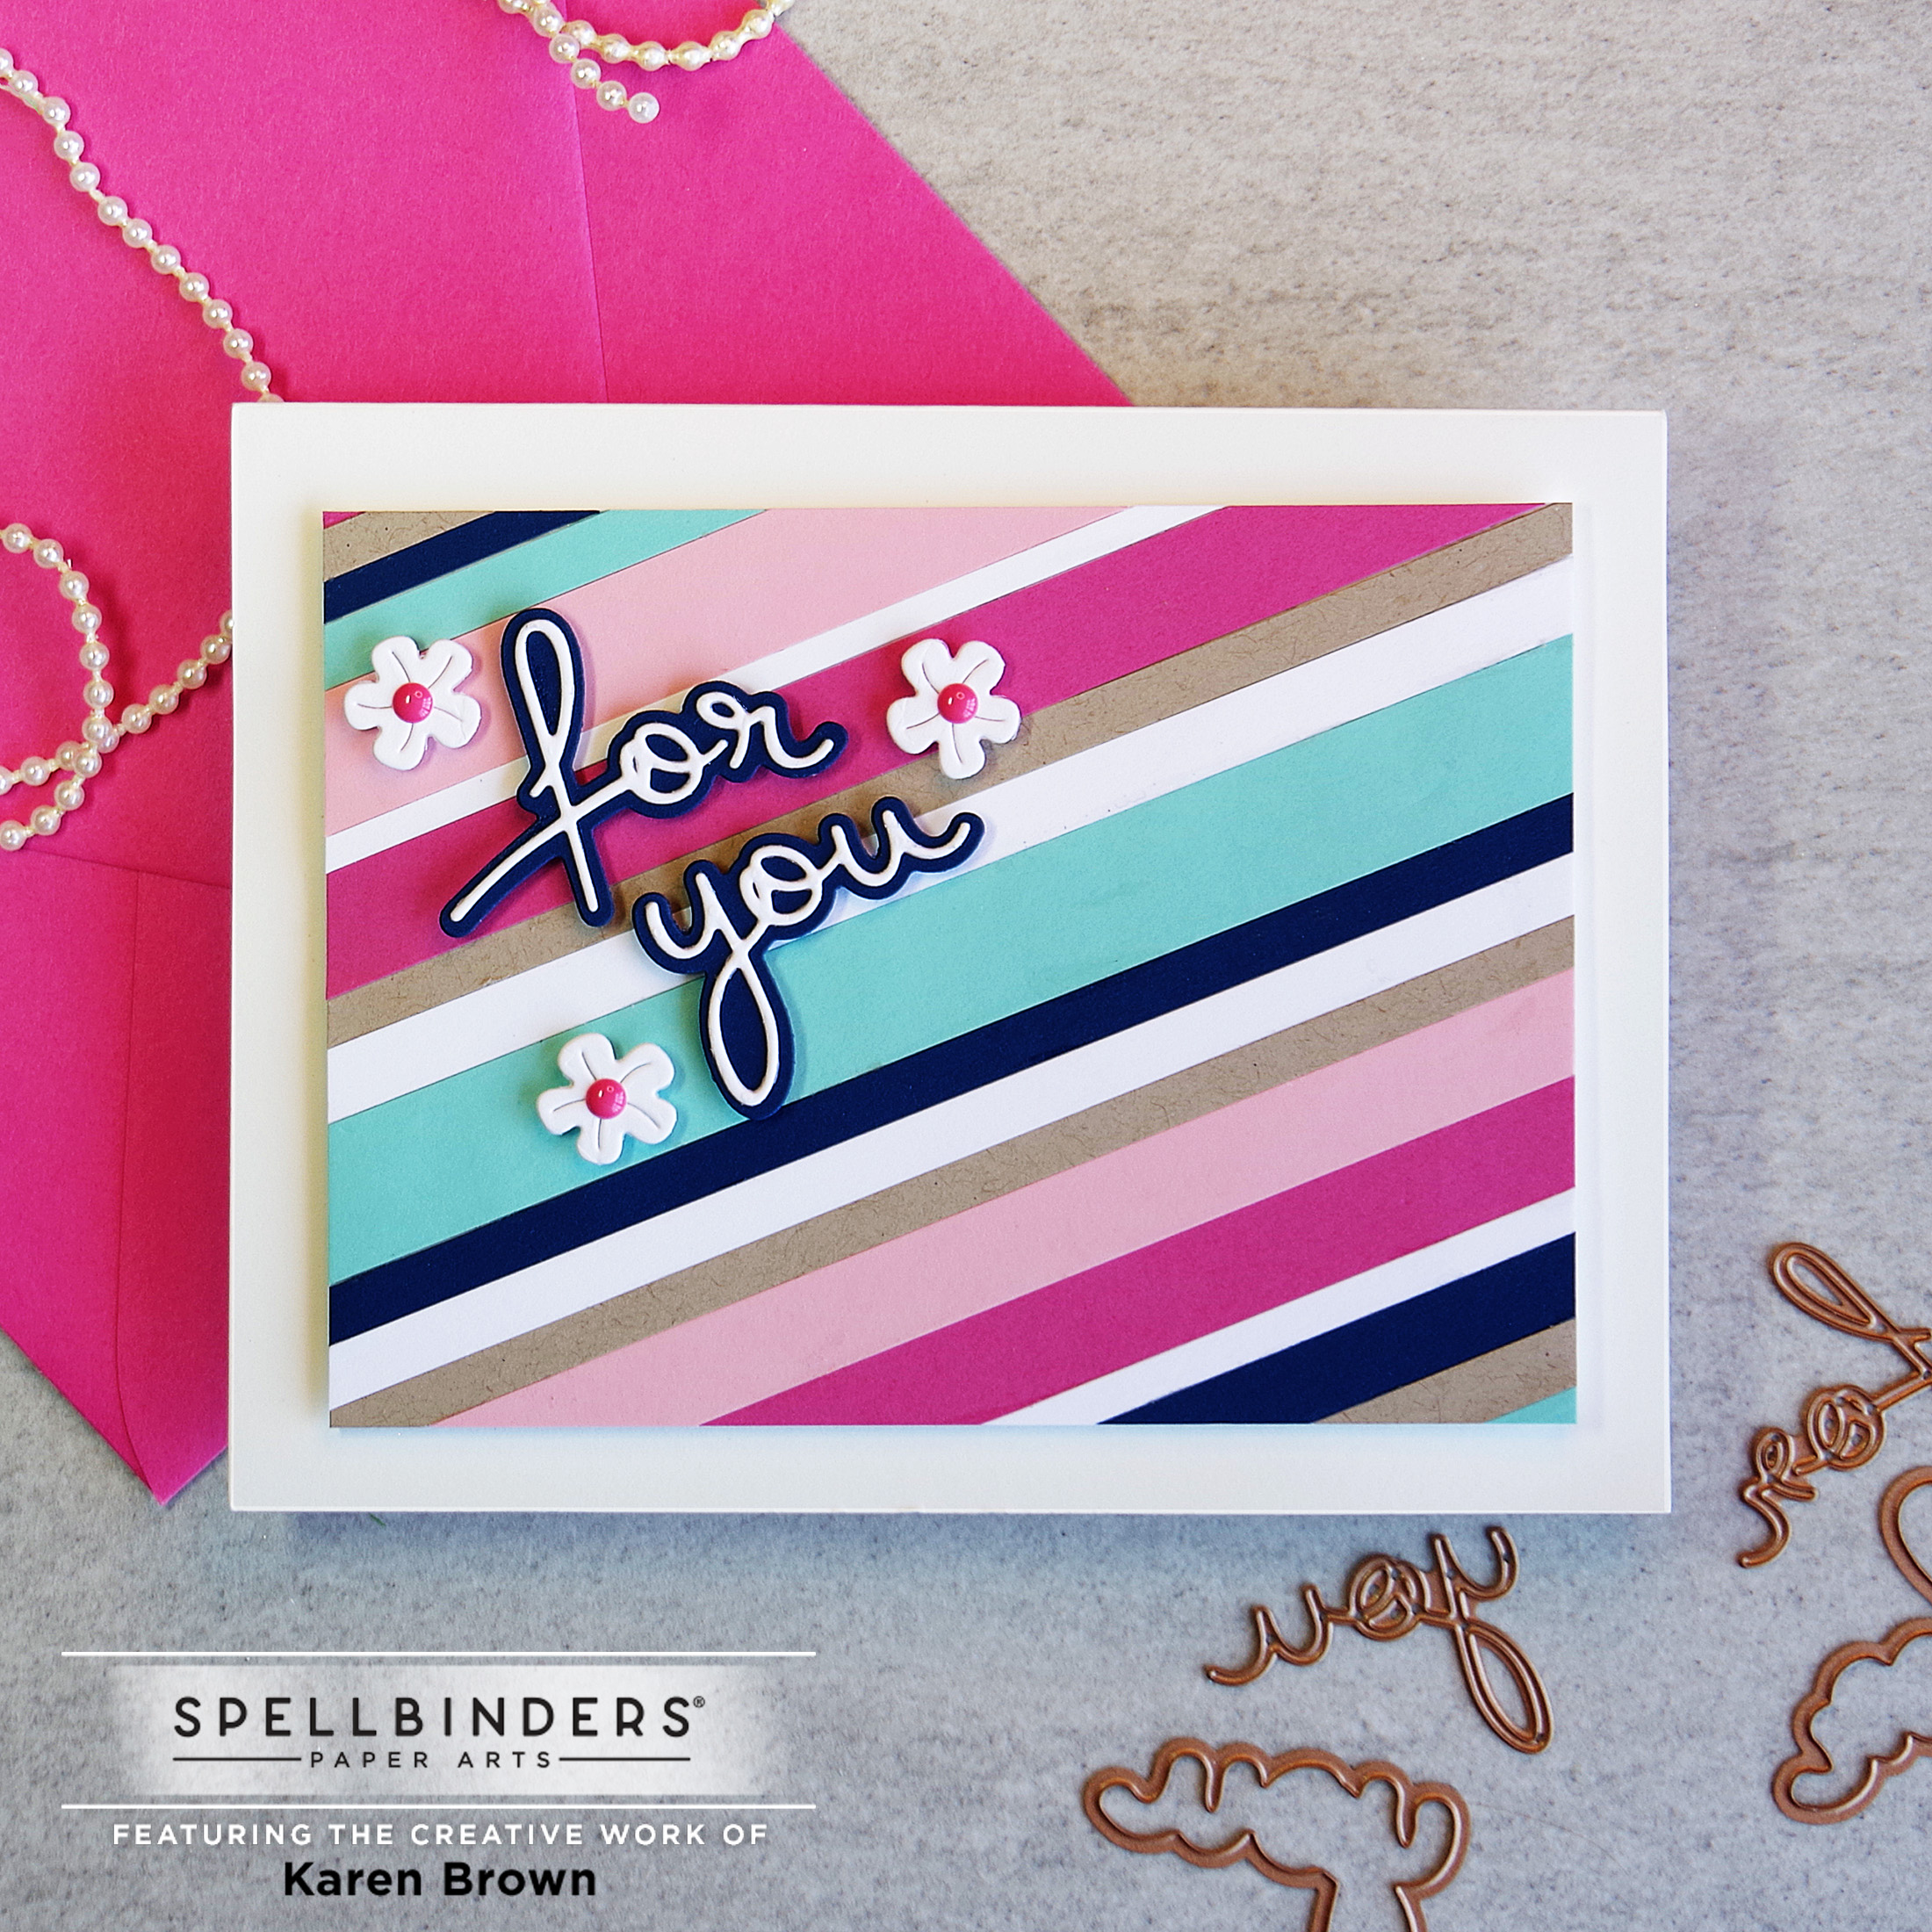 Handmade card with background made of strips of colored cardstock.